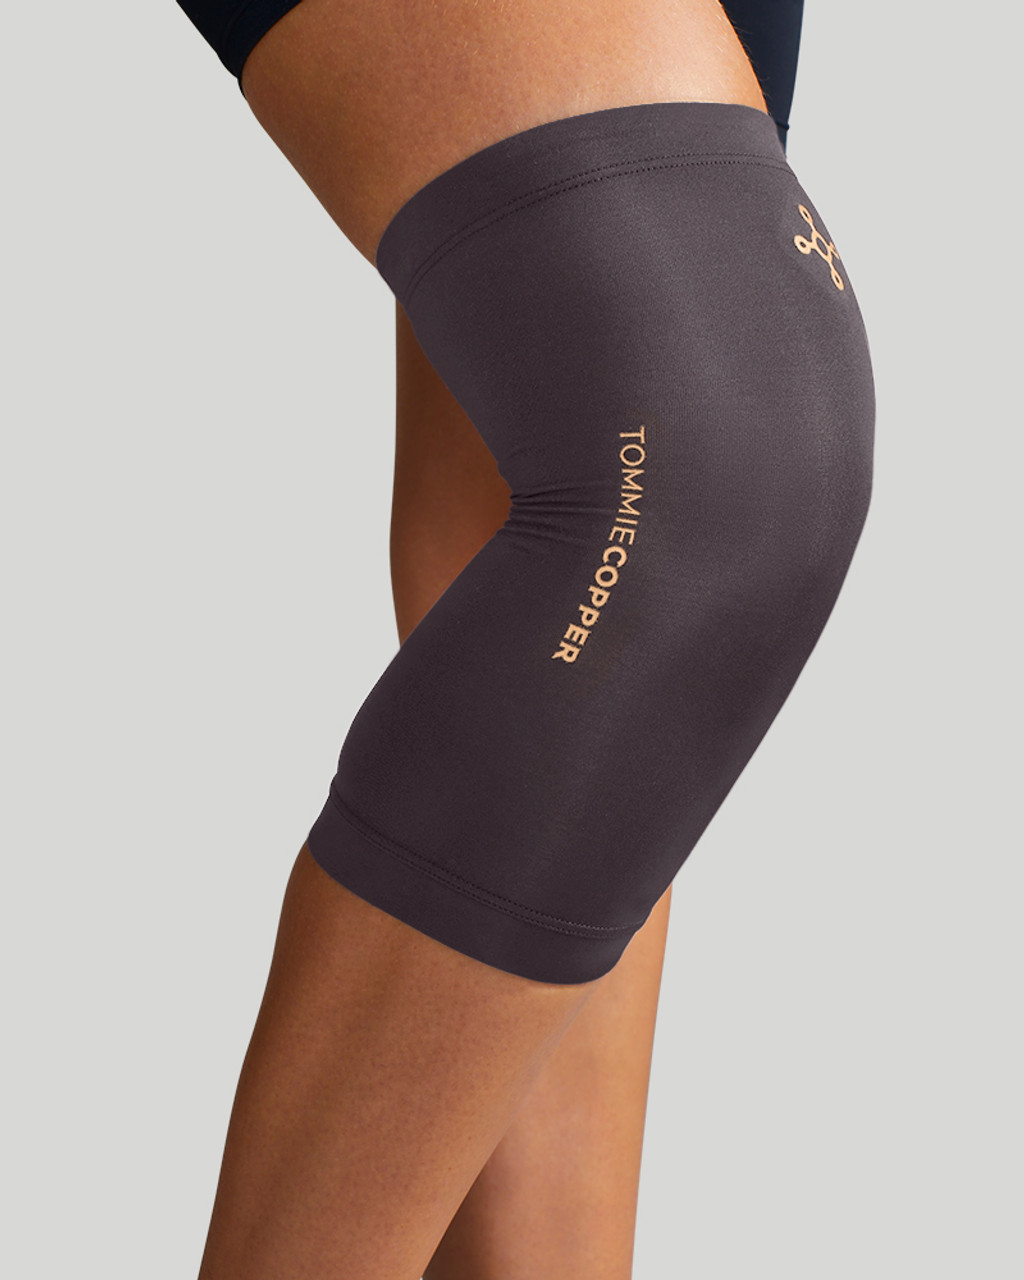 Tommie Copper Pro-Grade Compression Knee Sleeve Unisex Men & Women  Adjustable Ultimate Support Sleeve Integrated Straps for Knee Stability &  Muscle Support - Black Medium Medium Black